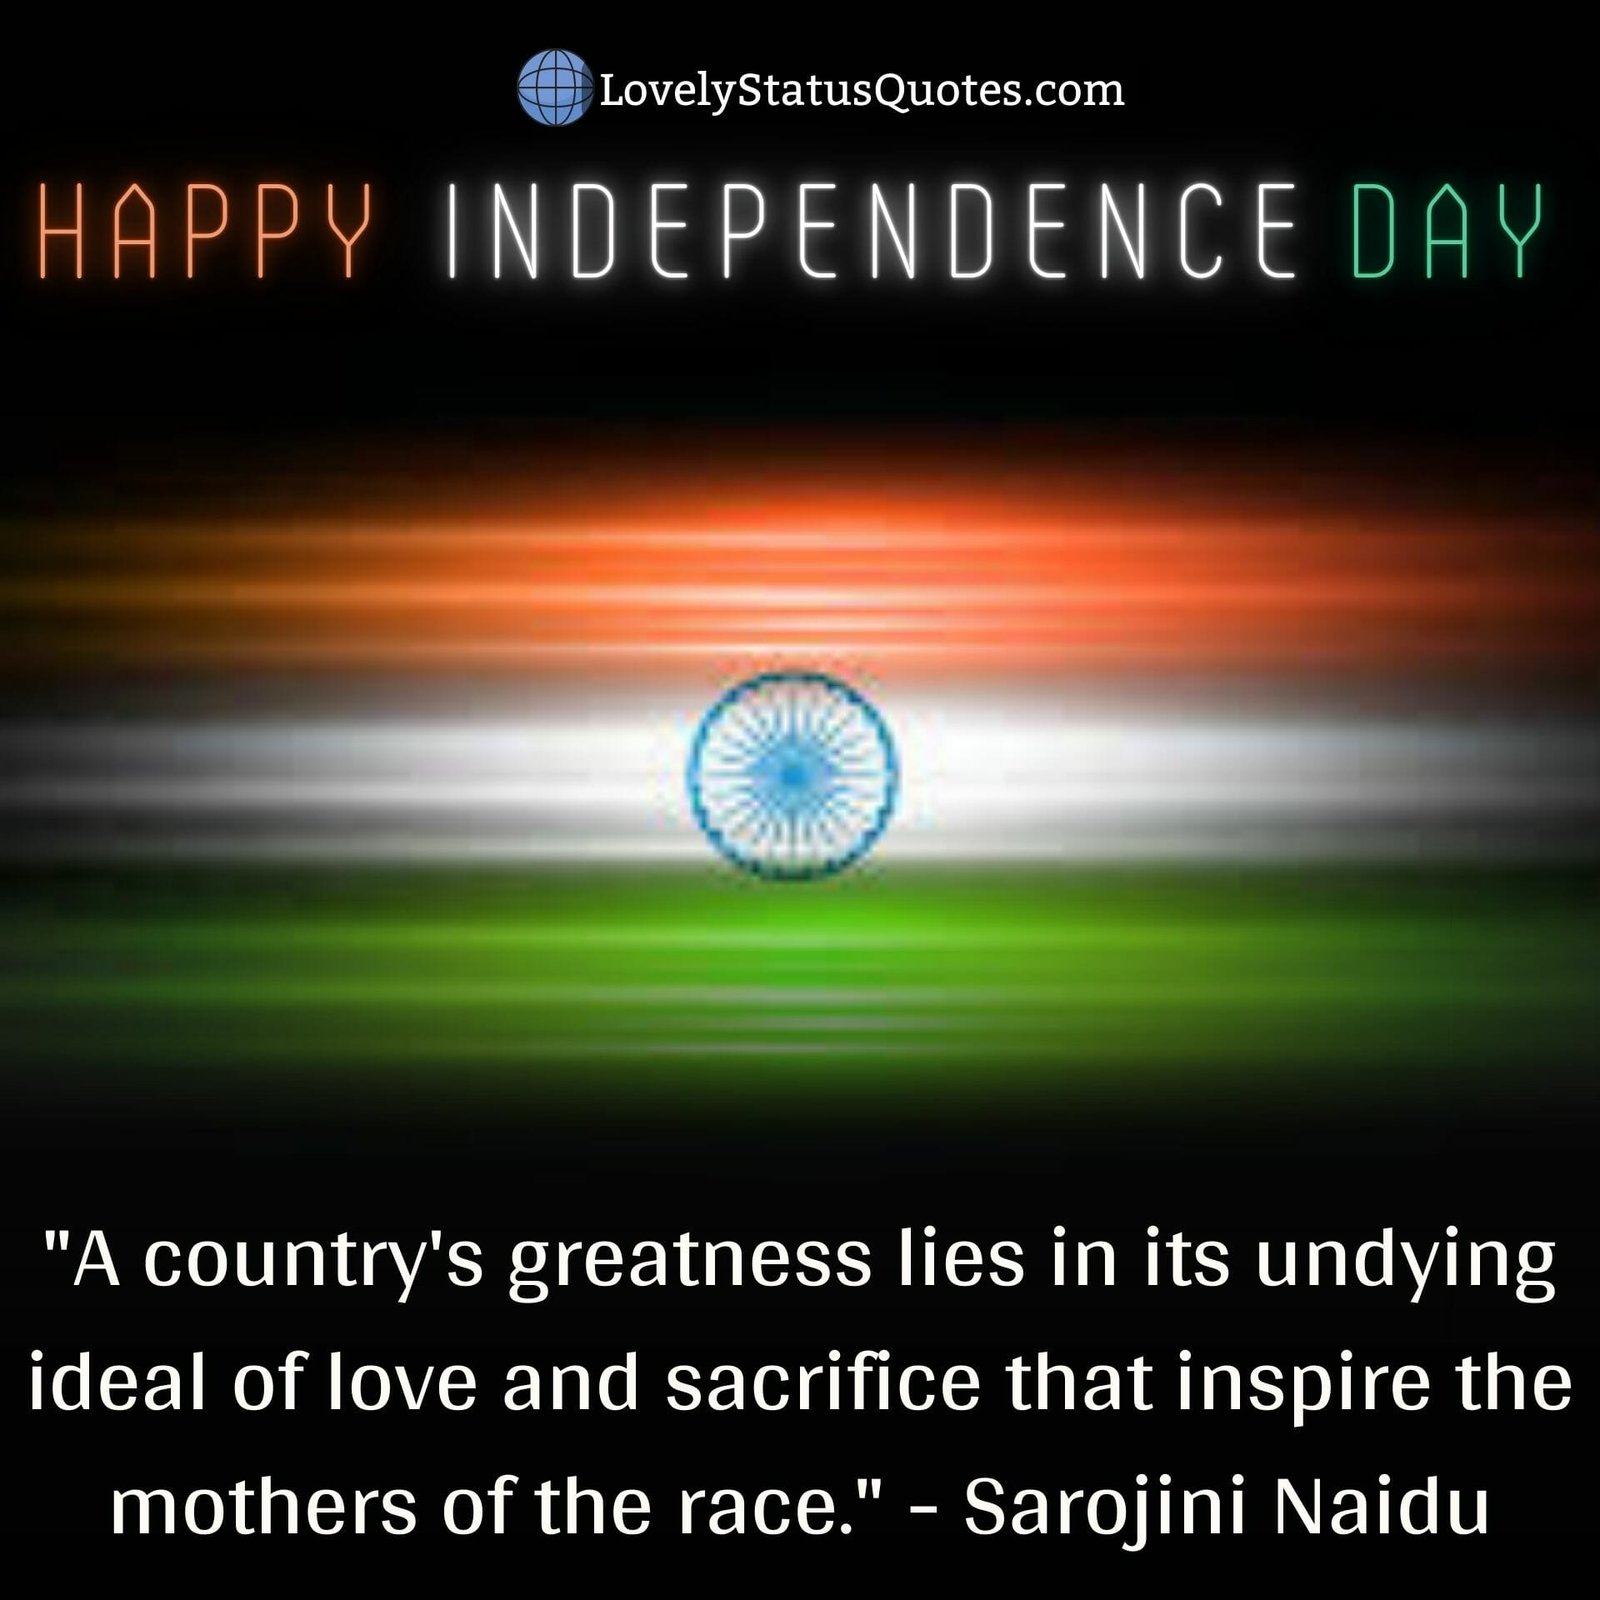 Happy Independence Day quotes by sarojni naidu